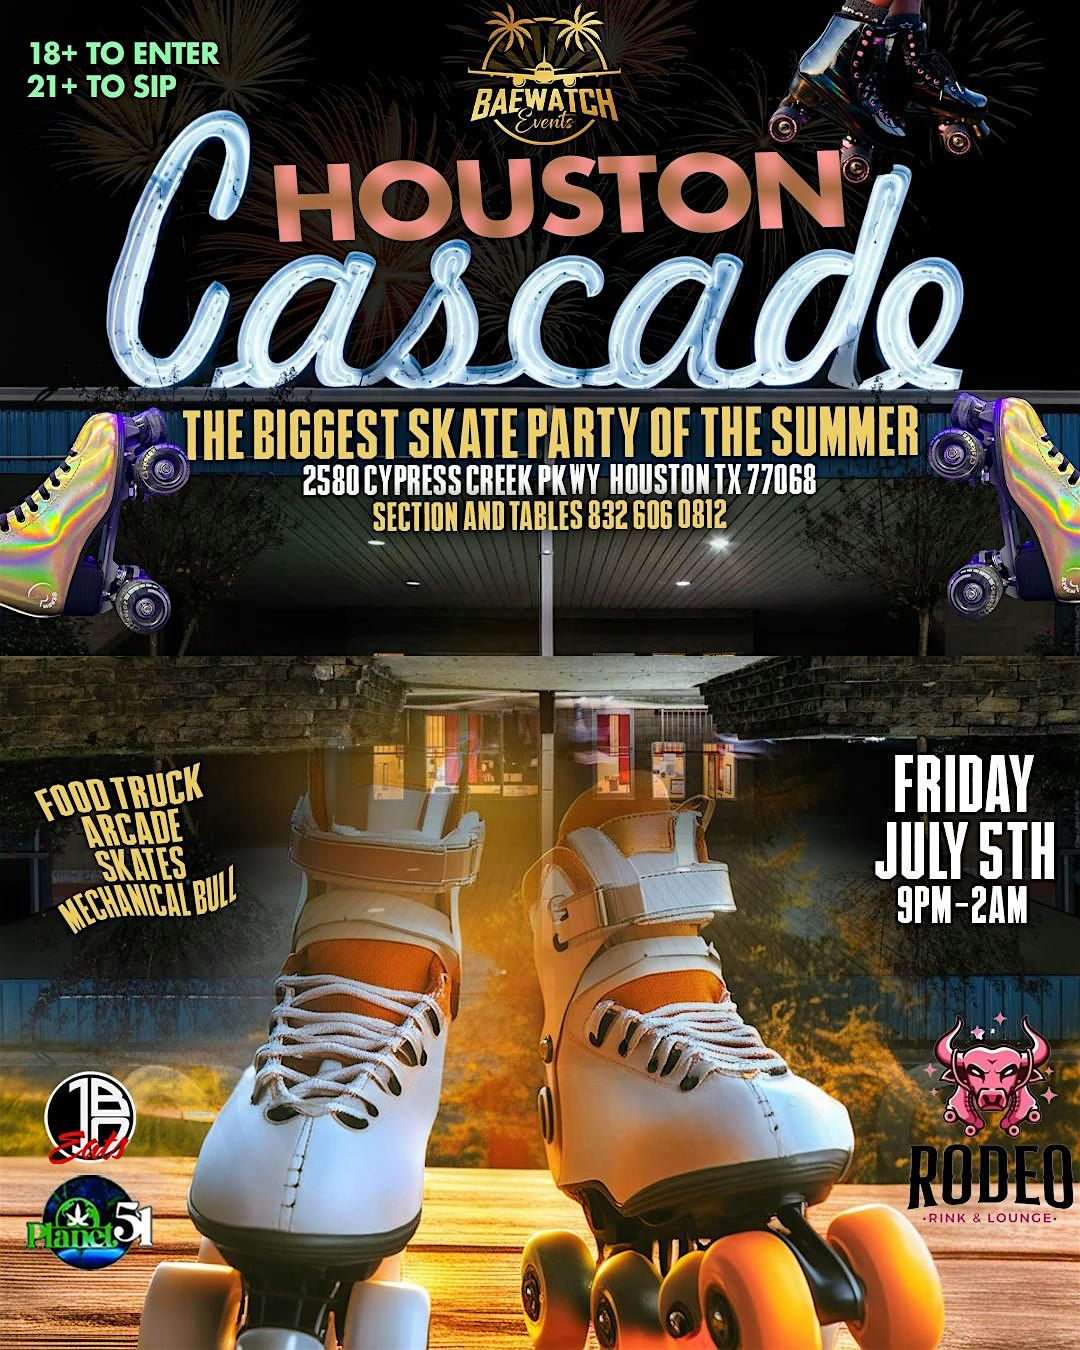 HOUSTON CASCADE THE BIGGEST SKATE  PARTY OF THE SUMMER!